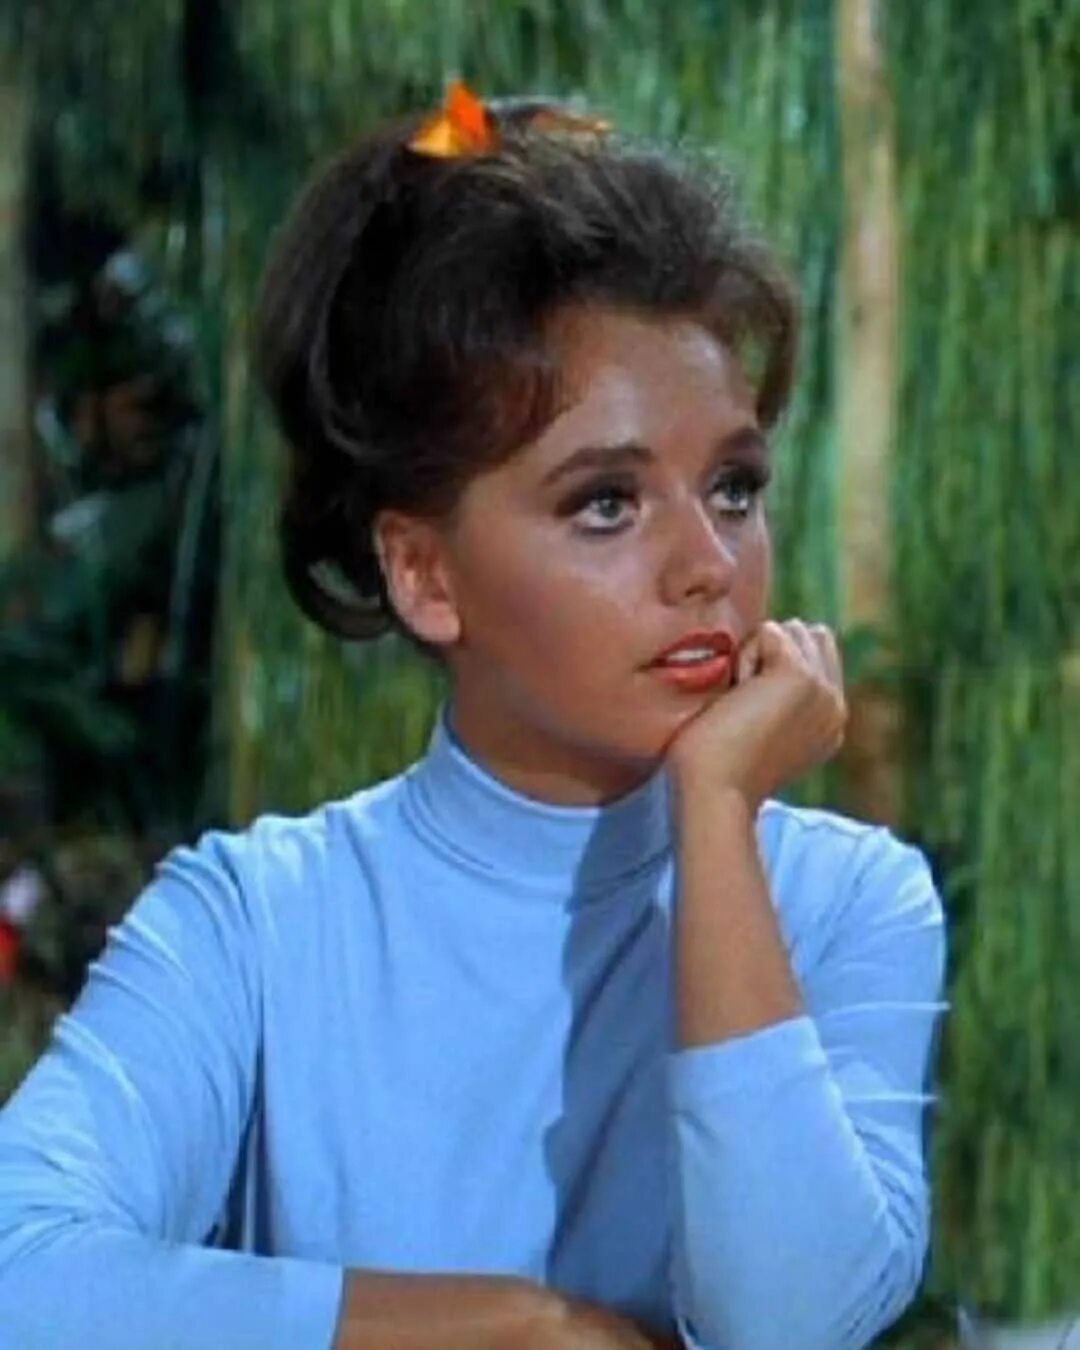 @nothingbutpixies: “Rest in Peace Dawn Wells MaryAnn of Gilligans Island #d...